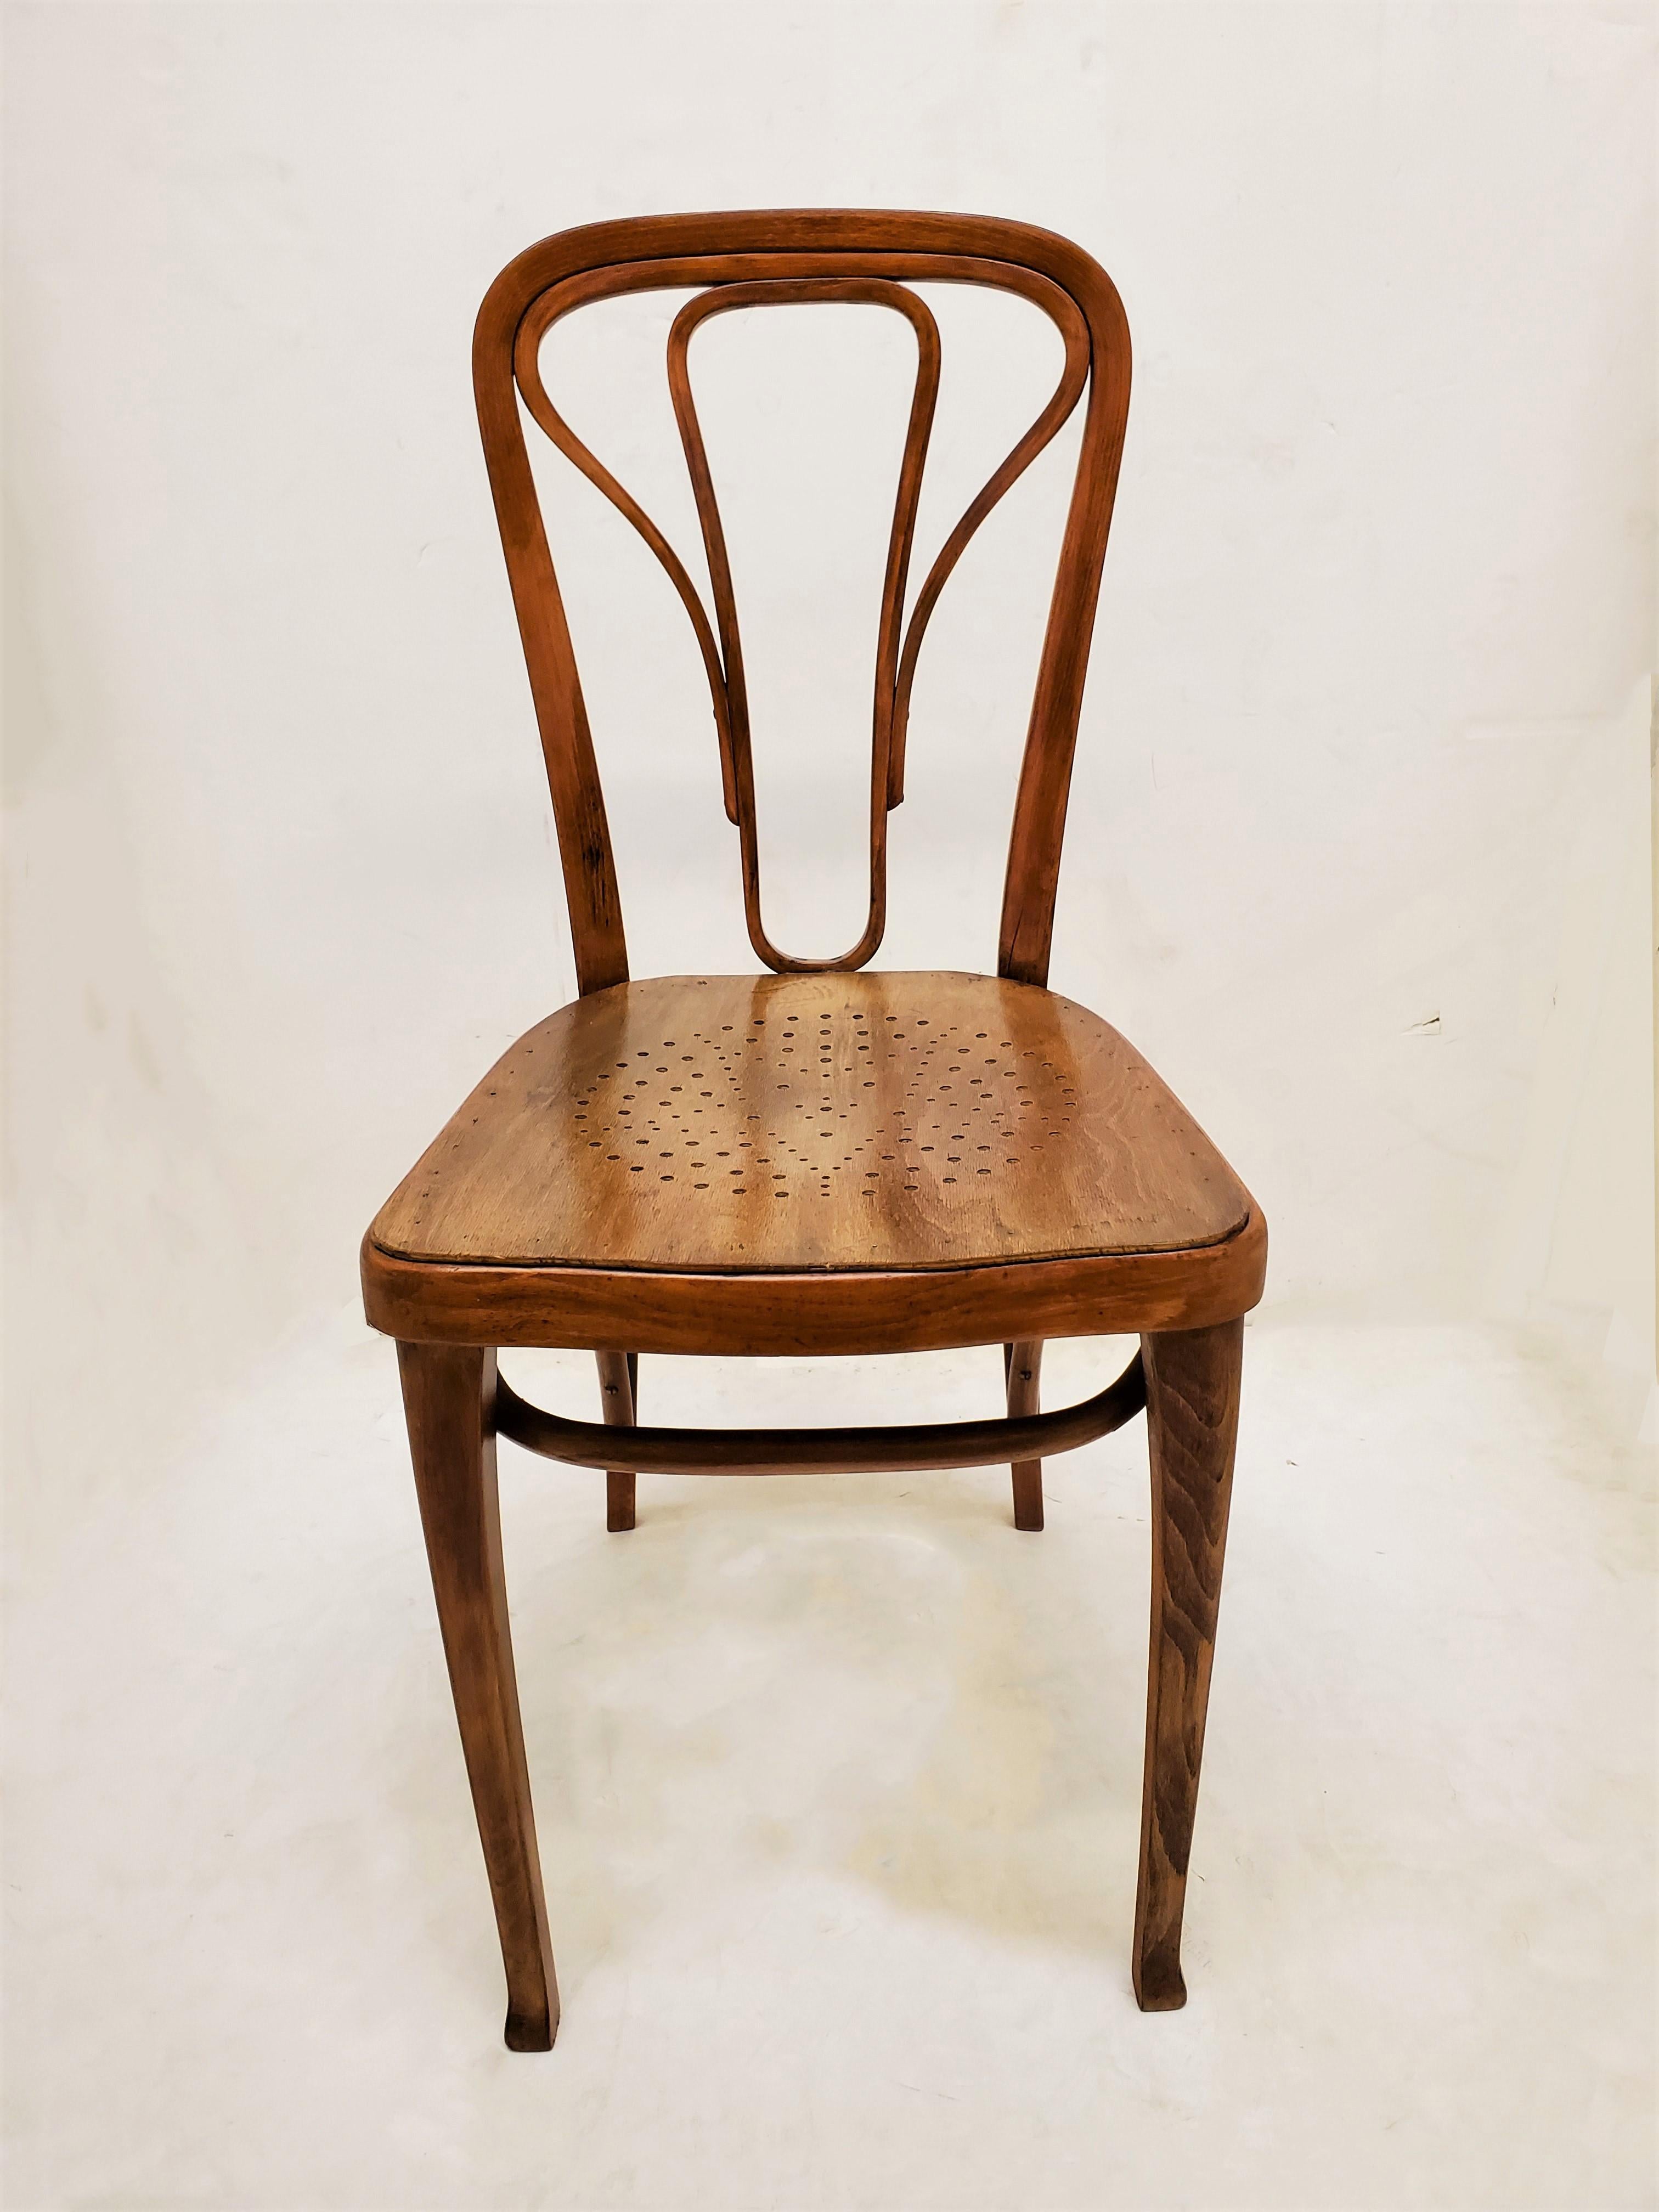 Original period Austrian, Wiener Werkstätte bentwood wood bistro chairs by manufacturer Thonet 1870-1956 . These authentic and elegant chairs feature sinuous steamed wood in an organic style with Bauhaus, Vienna Secession details. 
Double curved